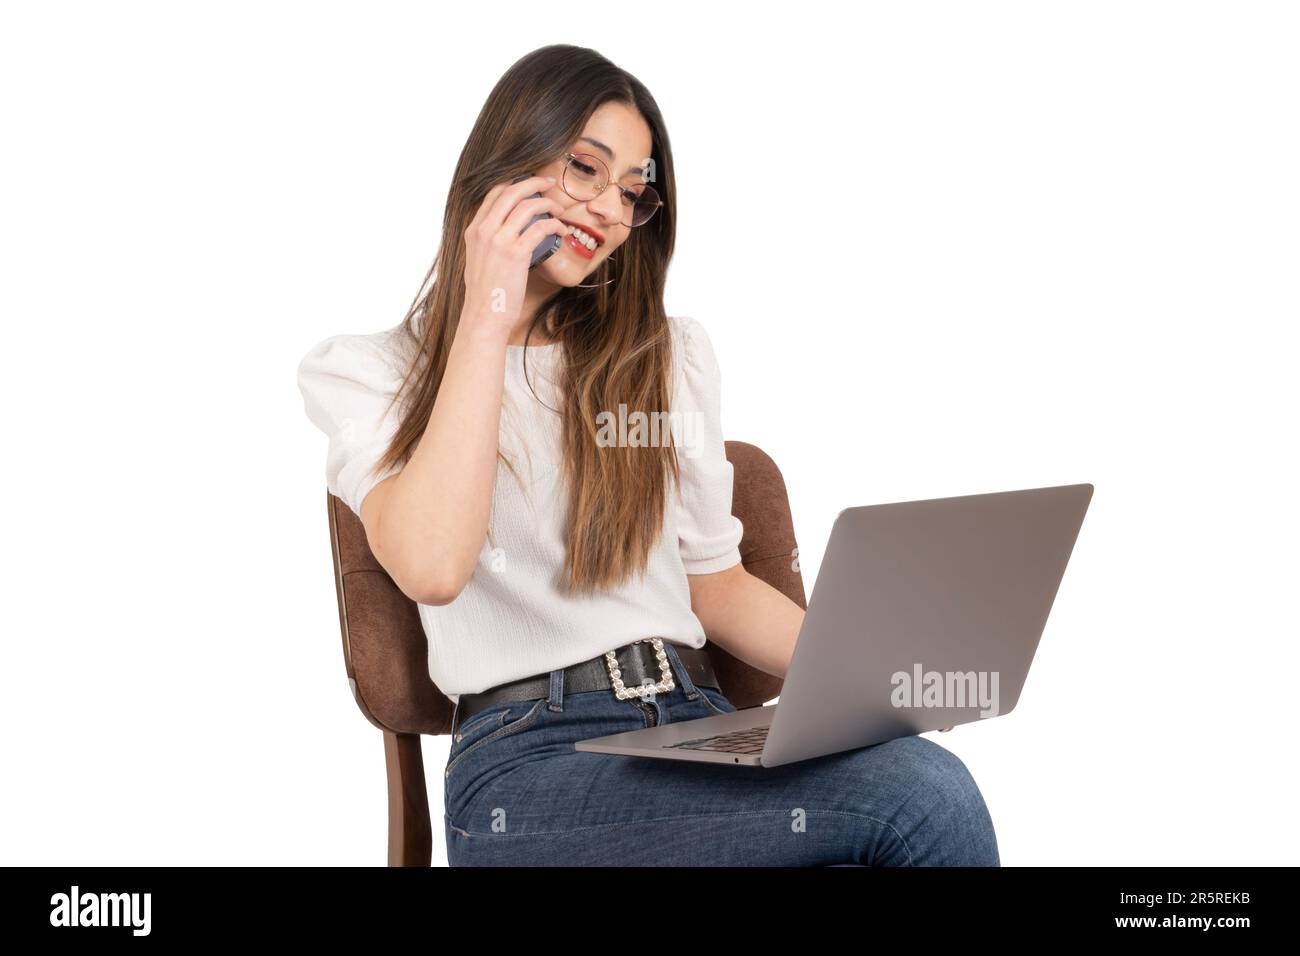 Talking on the phone, side view portrait of modern businesswoman talking on the phone. Smiling happy office worker female sitting on the chair. Stock Photo